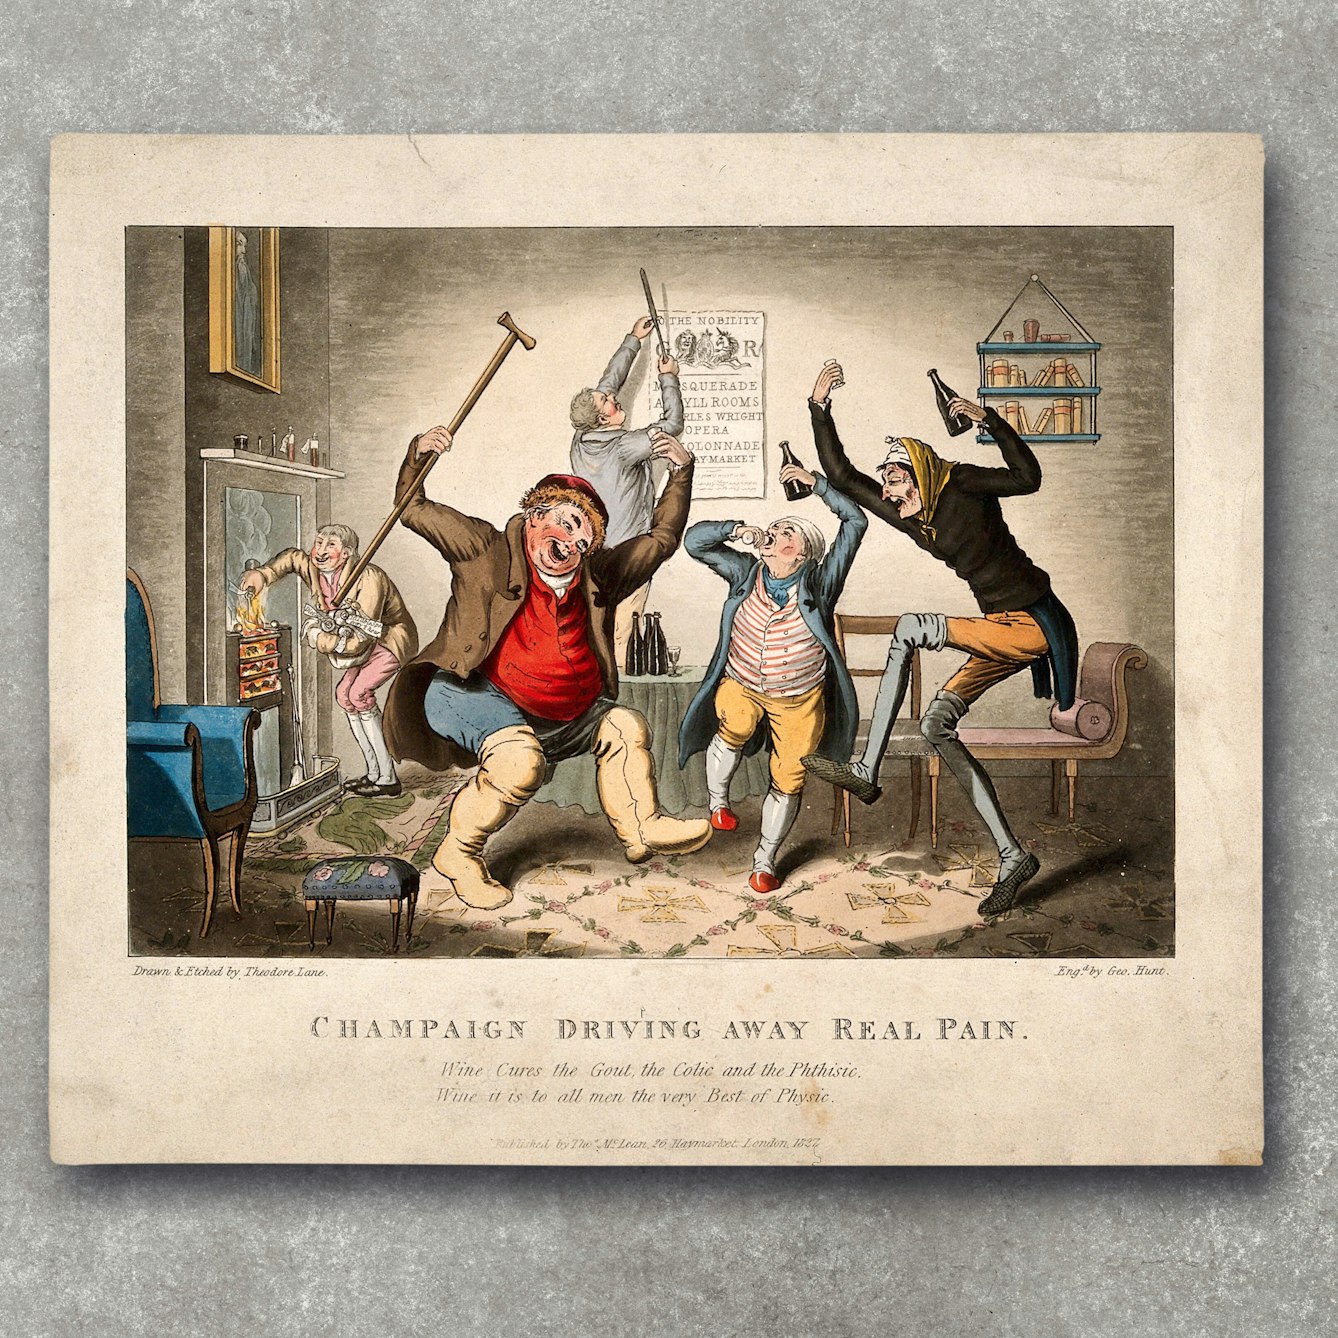 A colour illustration resting on a grey concrete textured background. The illustration shows three men in high spirits and leaping about. Two are holding bottles of beer, one is drinking from a glass. In the background, a man puts fuel on an open fire, while another pins up a poster.